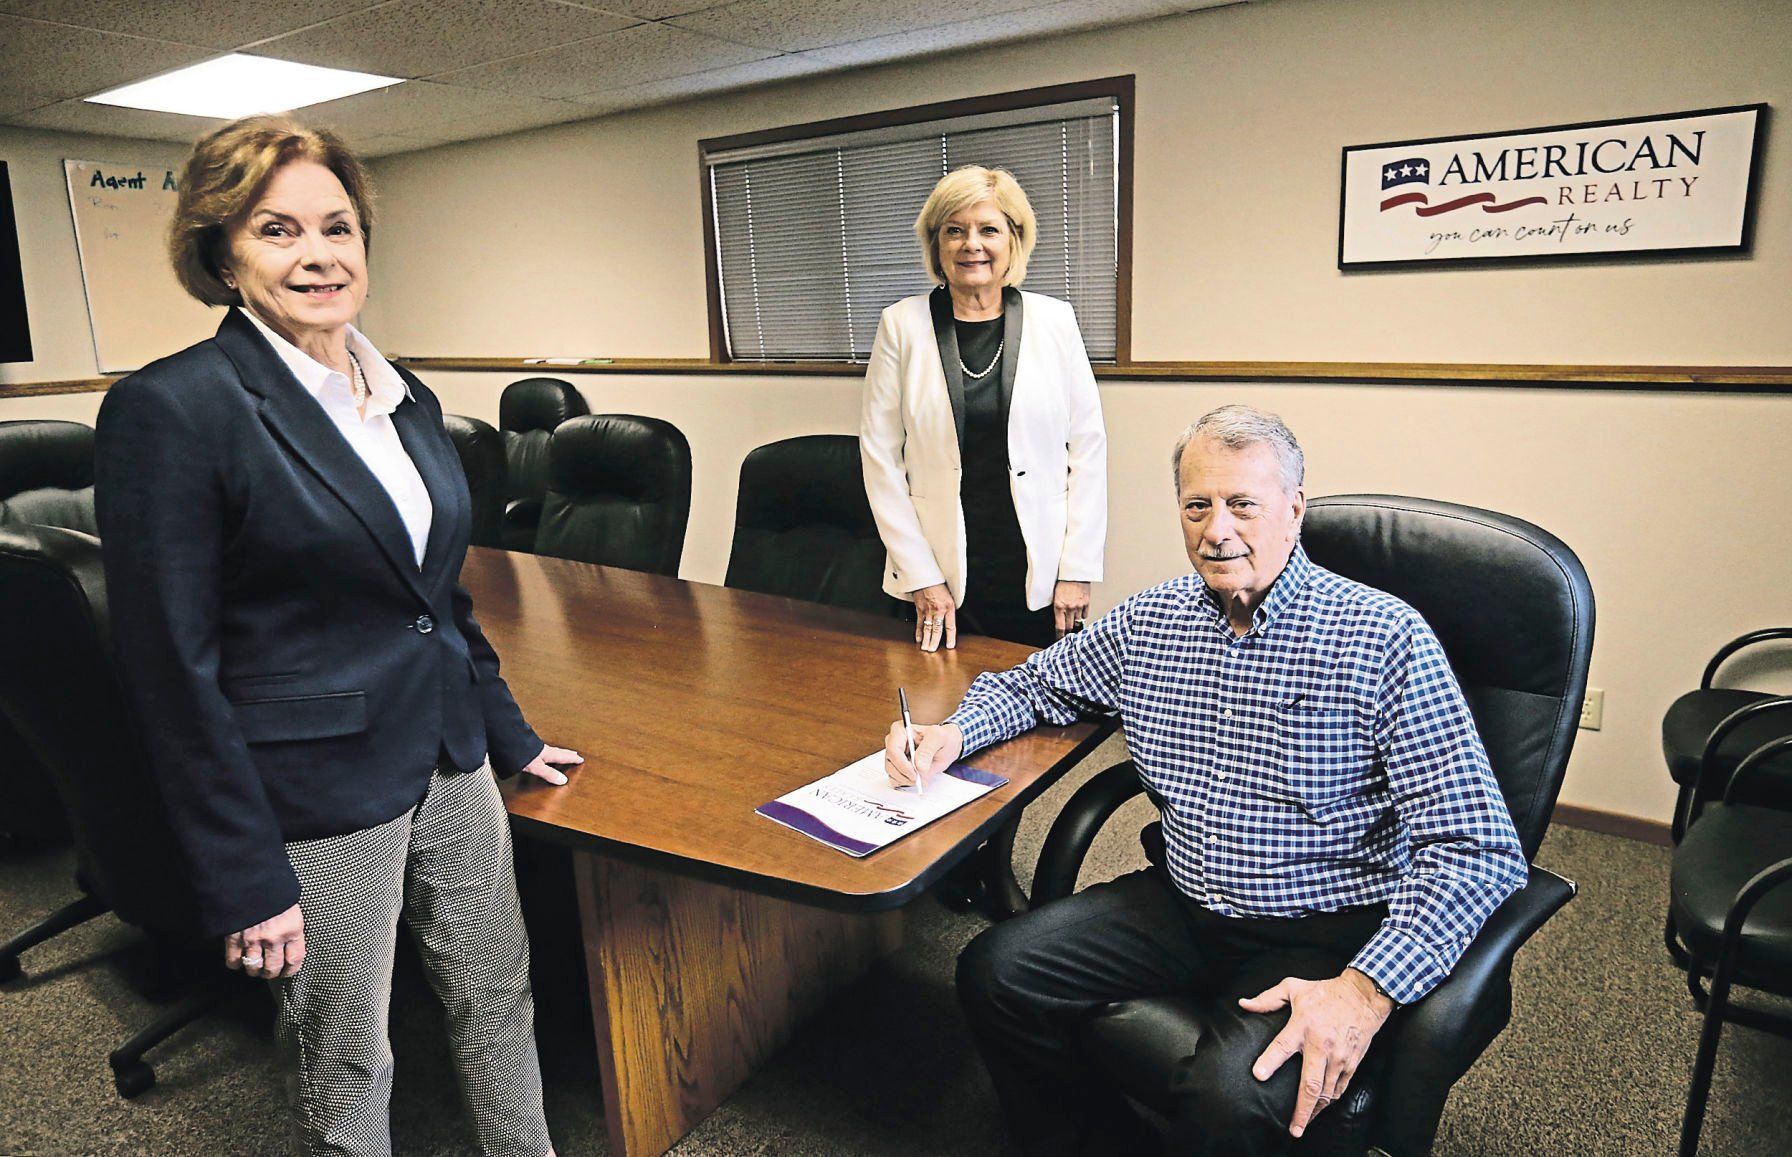 Peggy Nesler (from left), Shari Greenwood and Robert Neuwoehner gather in a boardroom at American Realty. Neuwoehner and Jim Curoe started it in Dubuque in 1972. Today, Nesler and Greenwood are at the helm as it celebrates its 50th anniversary.    PHOTO CREDIT: JESSICA REILLY